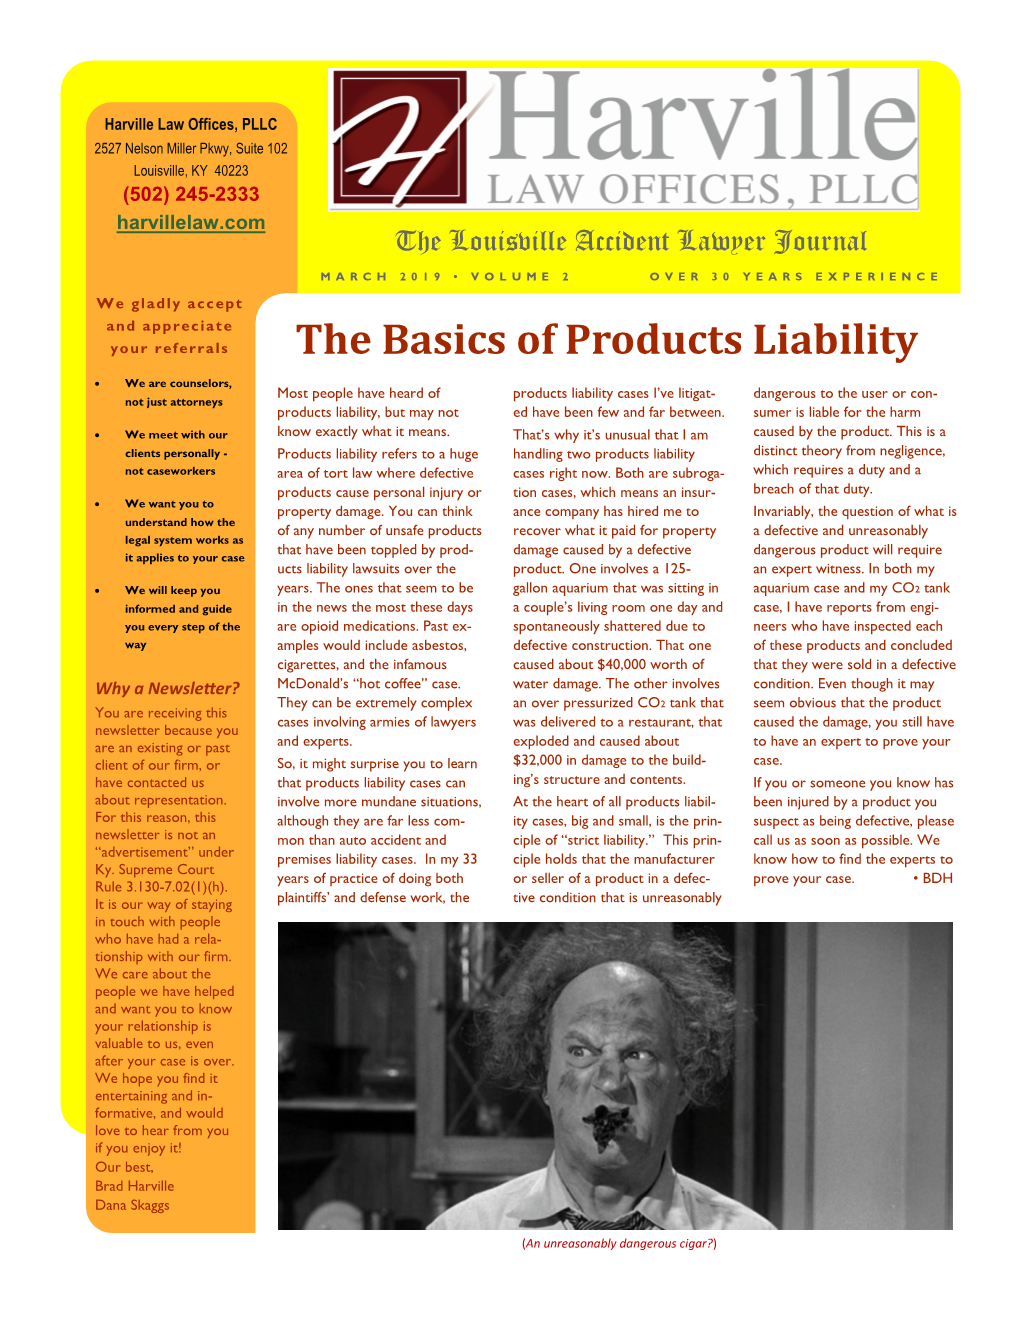 The Basics of Products Liability